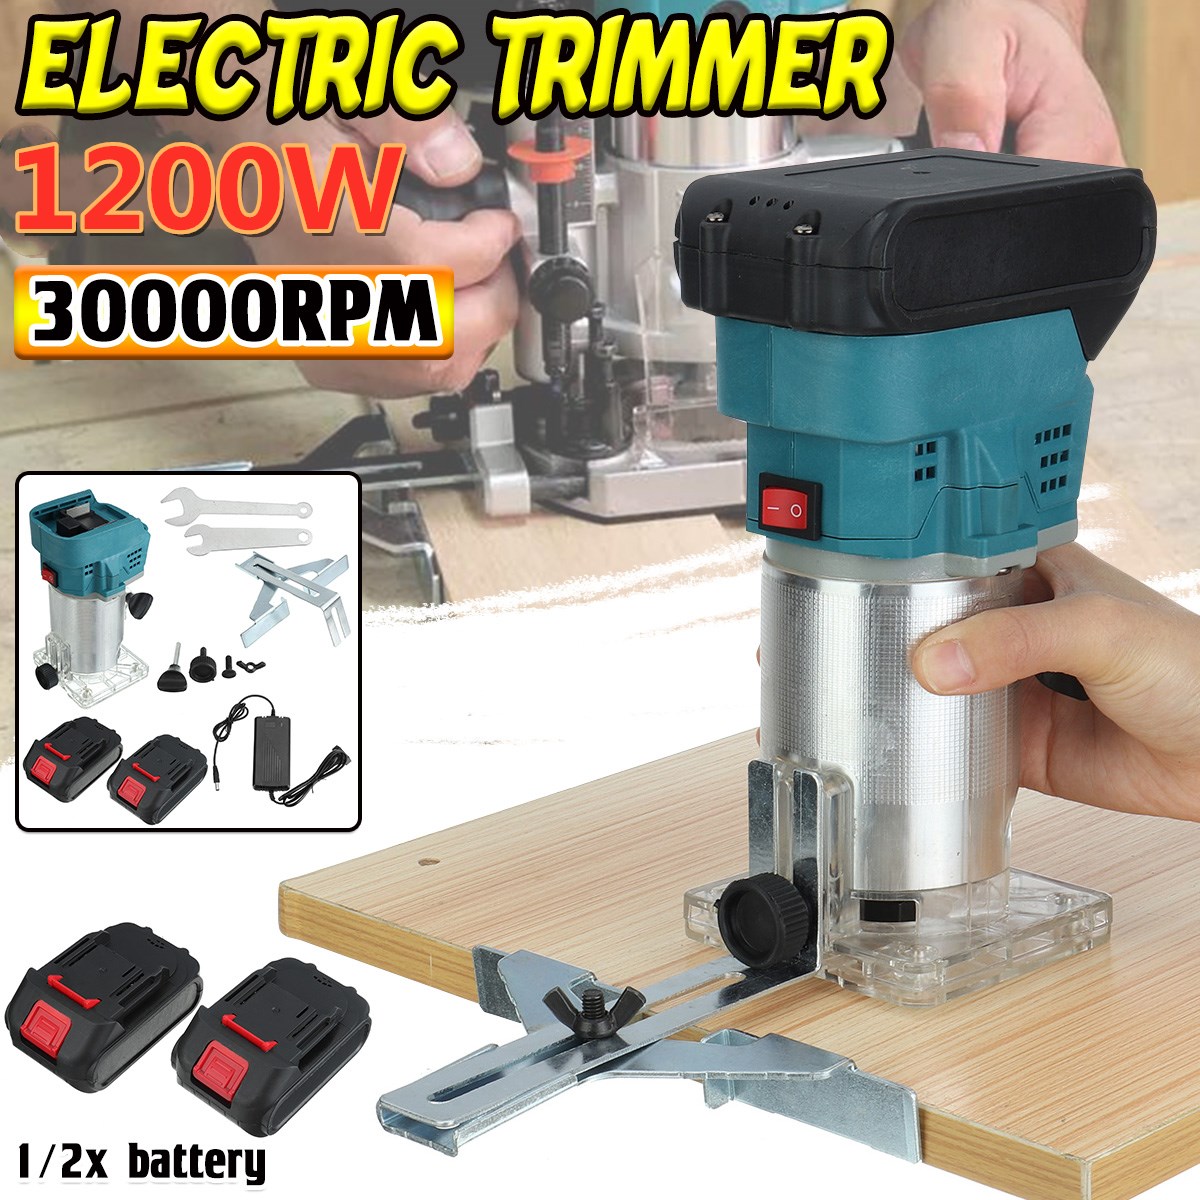 635mm-Cordless-Electric-Trimmer-Compact-Palm-Router-Corded-Woodworking-Trimming-Edge-Guide-Wood-W-12-1854950-1